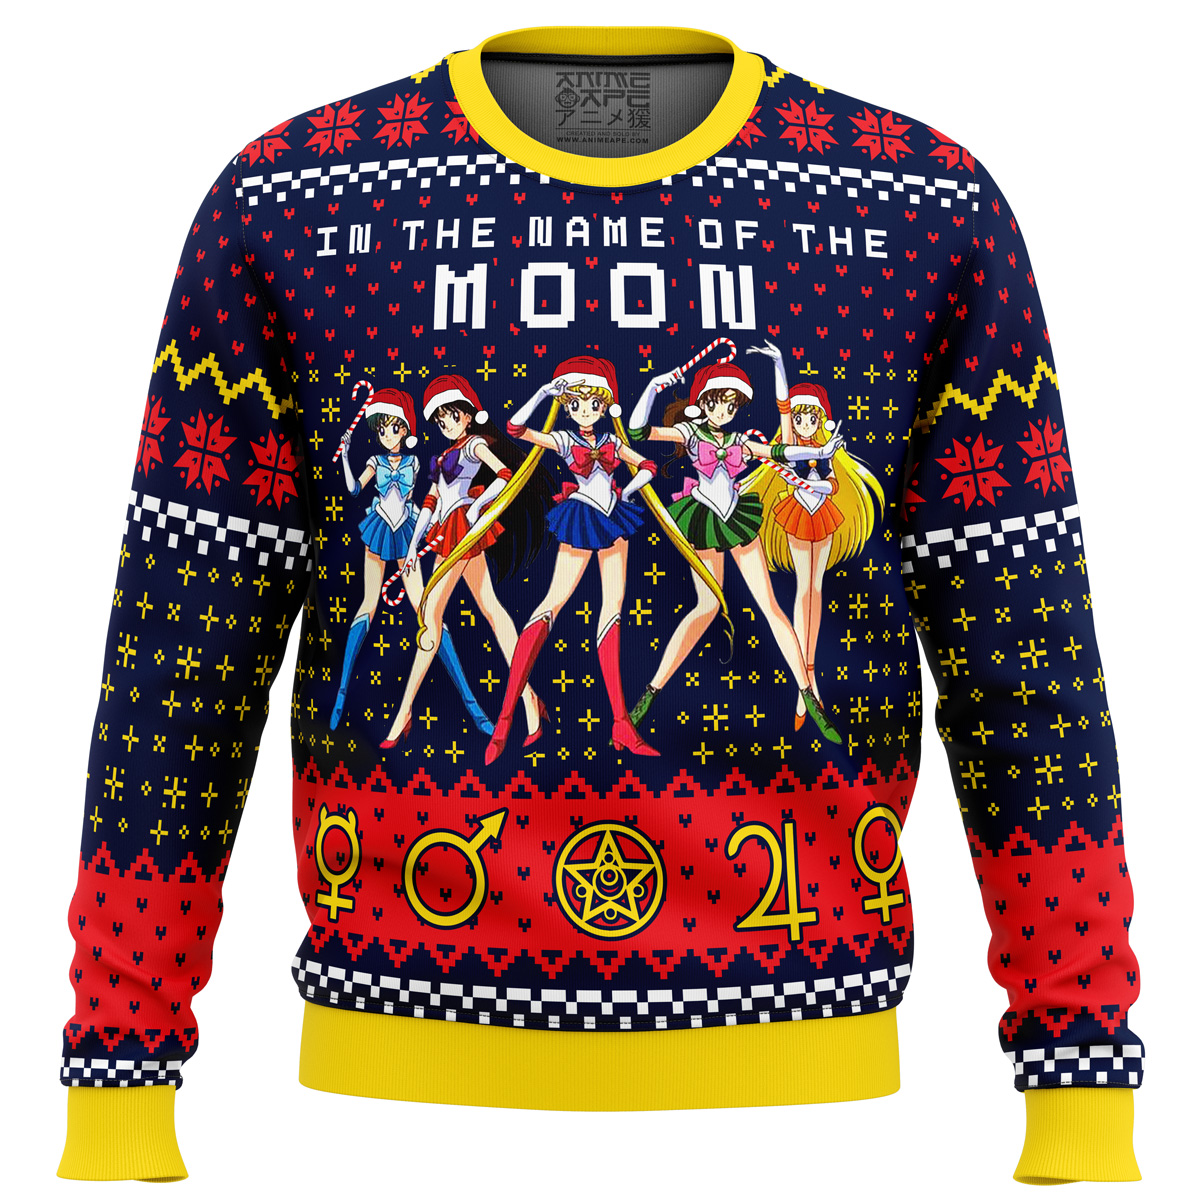 sailor moon in the name of the moon ugly christmas sweater ana2207 3807 - Fandomaniax Store